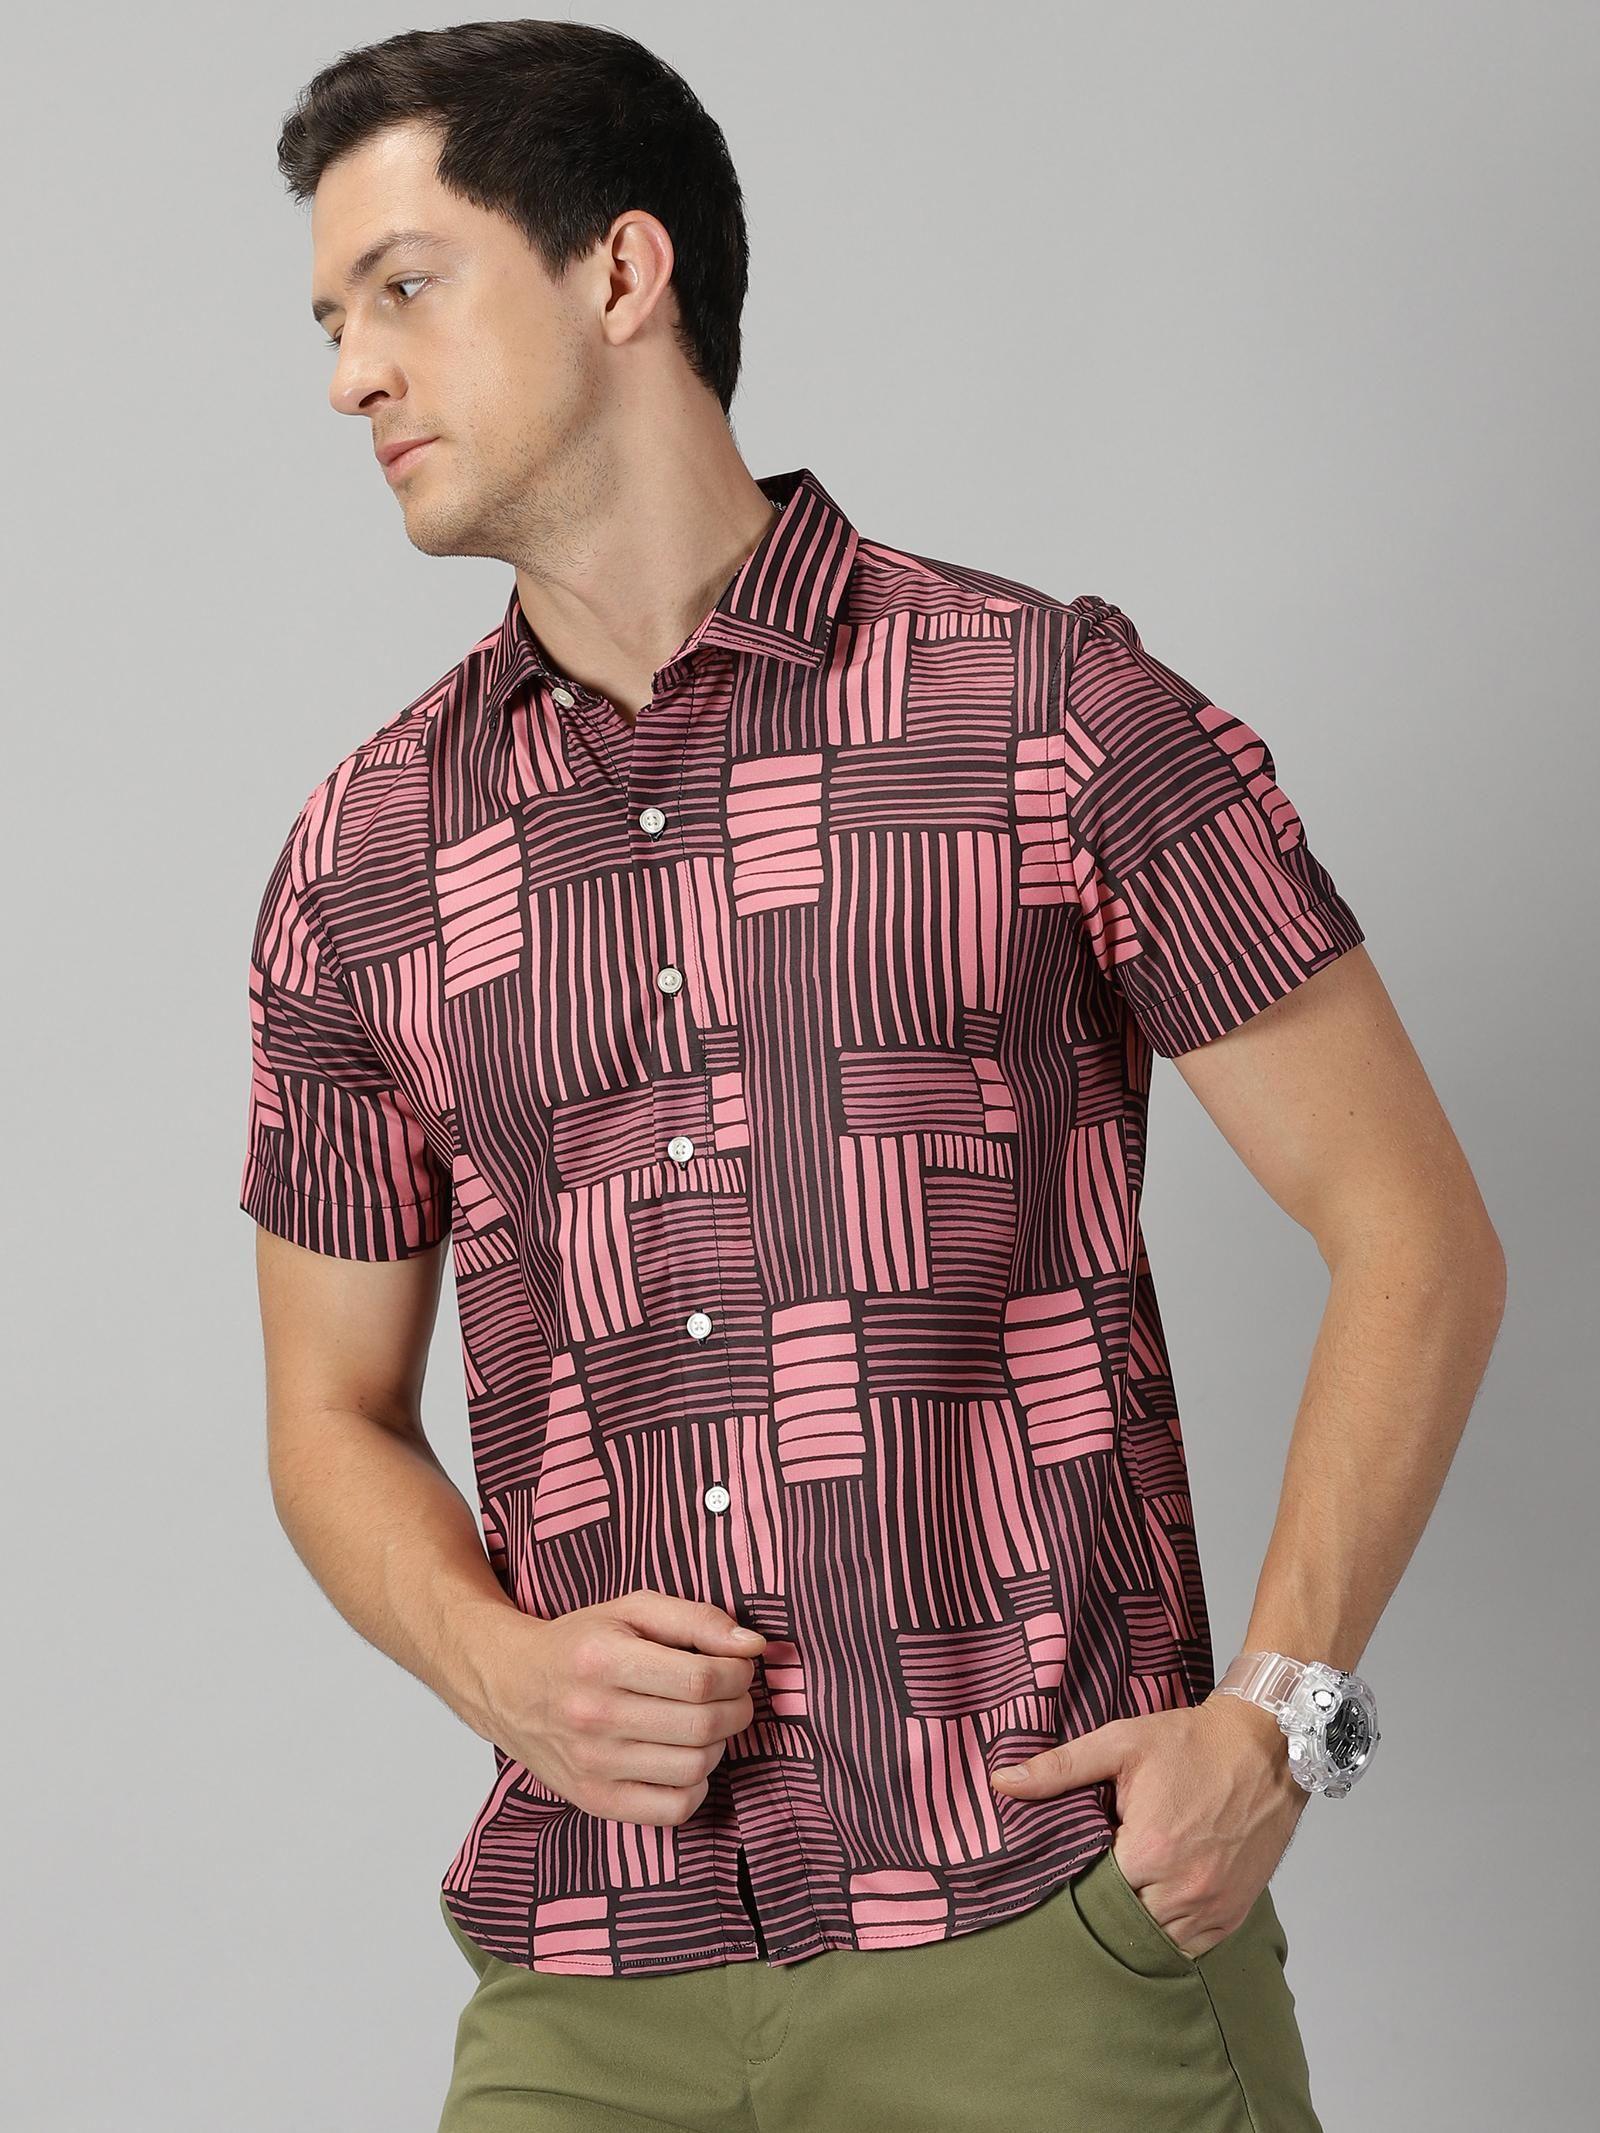 Rayon Printed Men's Casual Shirt Regular Fit with Half Sleeves and Stylish Print